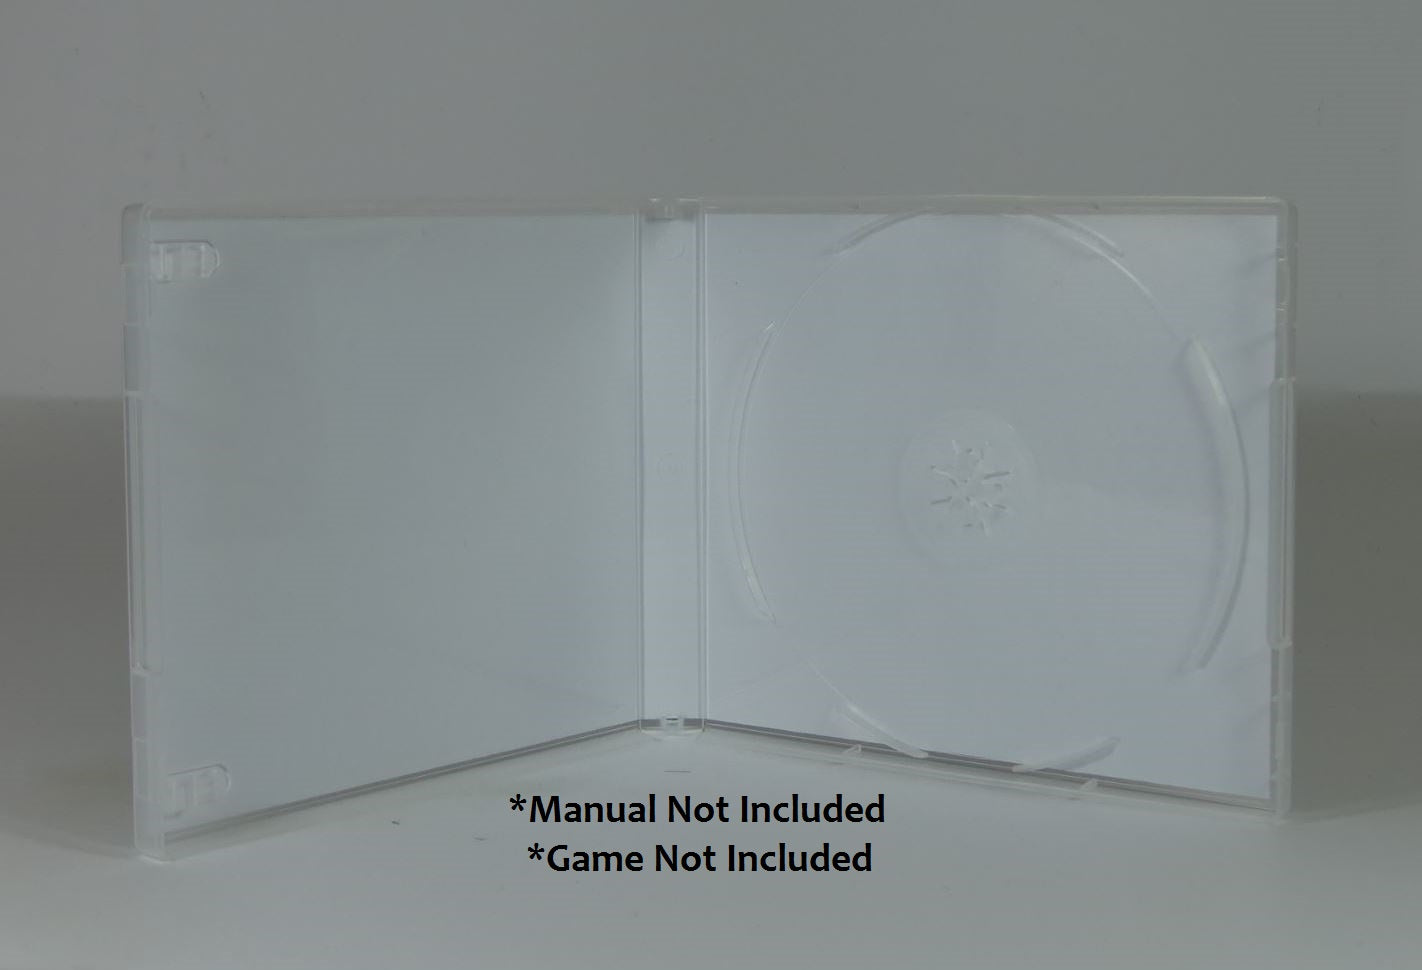 Metal Gear Solid Special Missions - PS1 Replacement Case